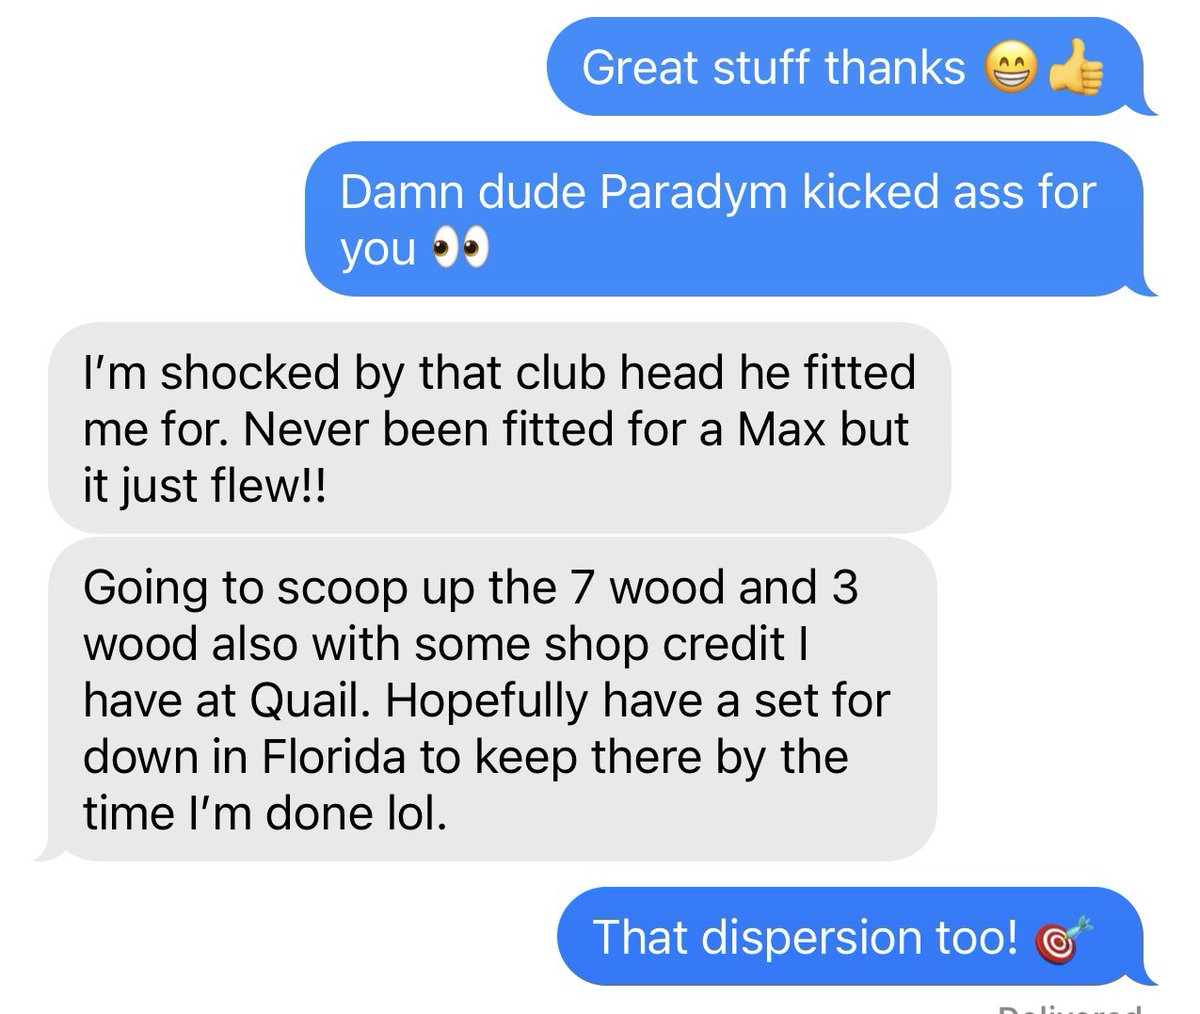 One of the eight players in #PWPITheOC SlingTheBling (Tom on Insta) just sent me his Callaway Driver fitting TrackMan report and he’s been freaking weaponized. 👀

He’s gained 19 yards in carry and tighter dispersion with the new Paradym Ai-Smoke over his TaylorMade gamer. Smash